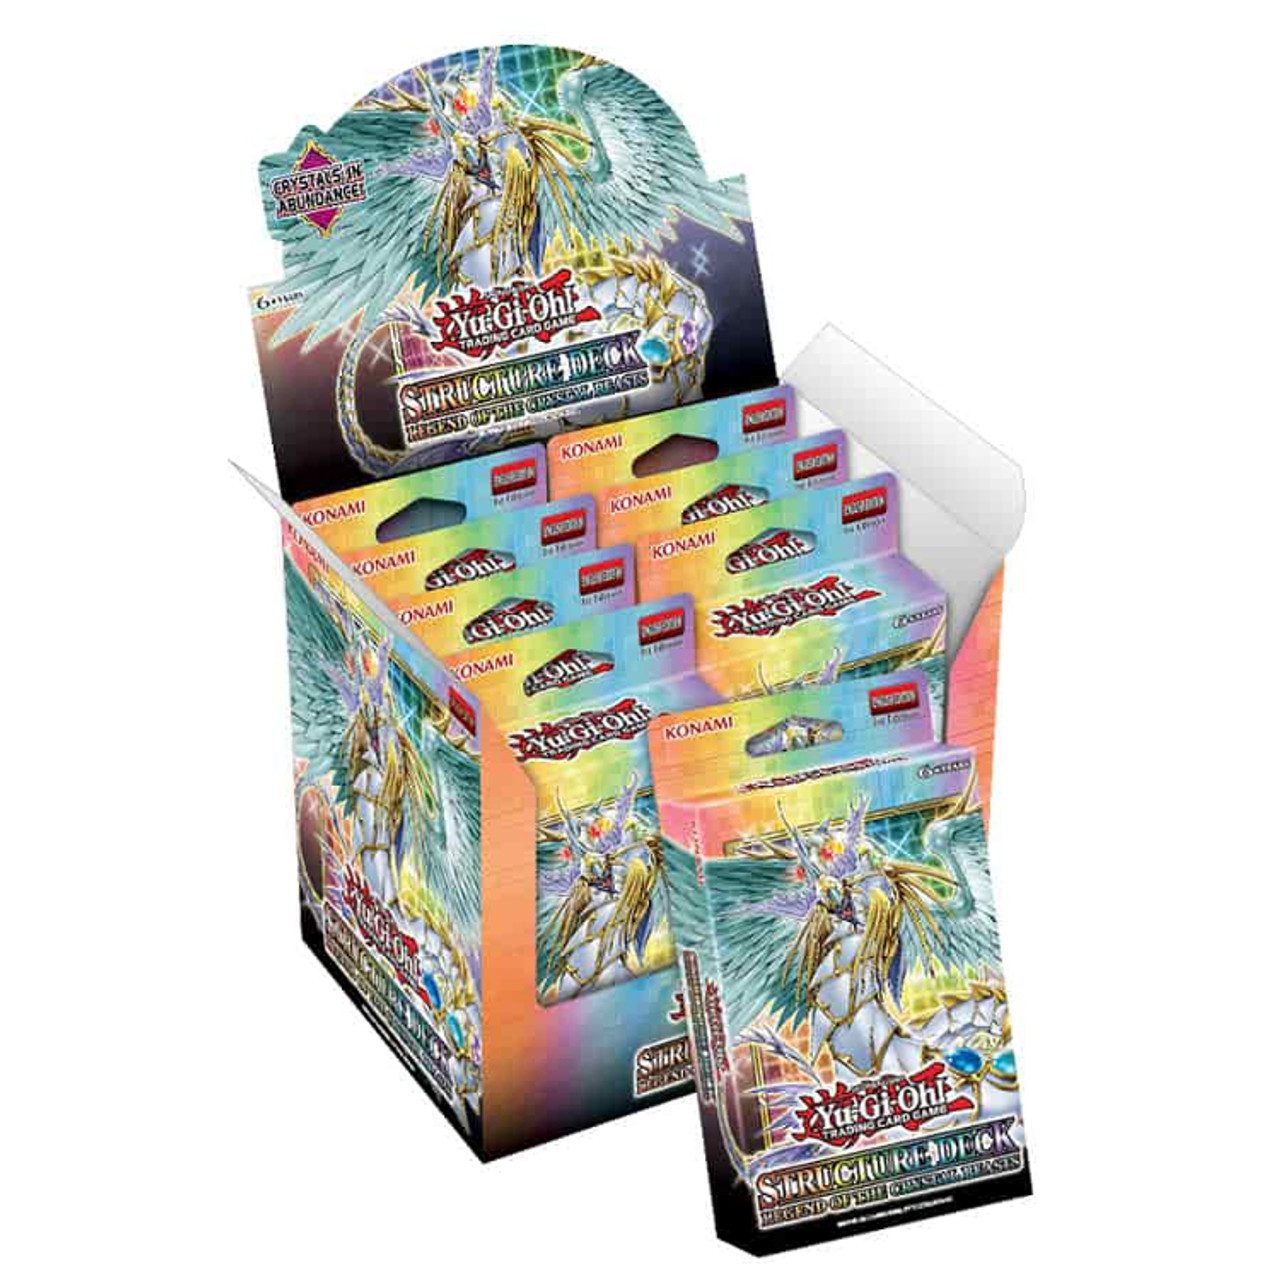 Yu Gi Oh Legend Of The Crystal Beasts Structure Deck Display 8 1st Edition Game Nerdz